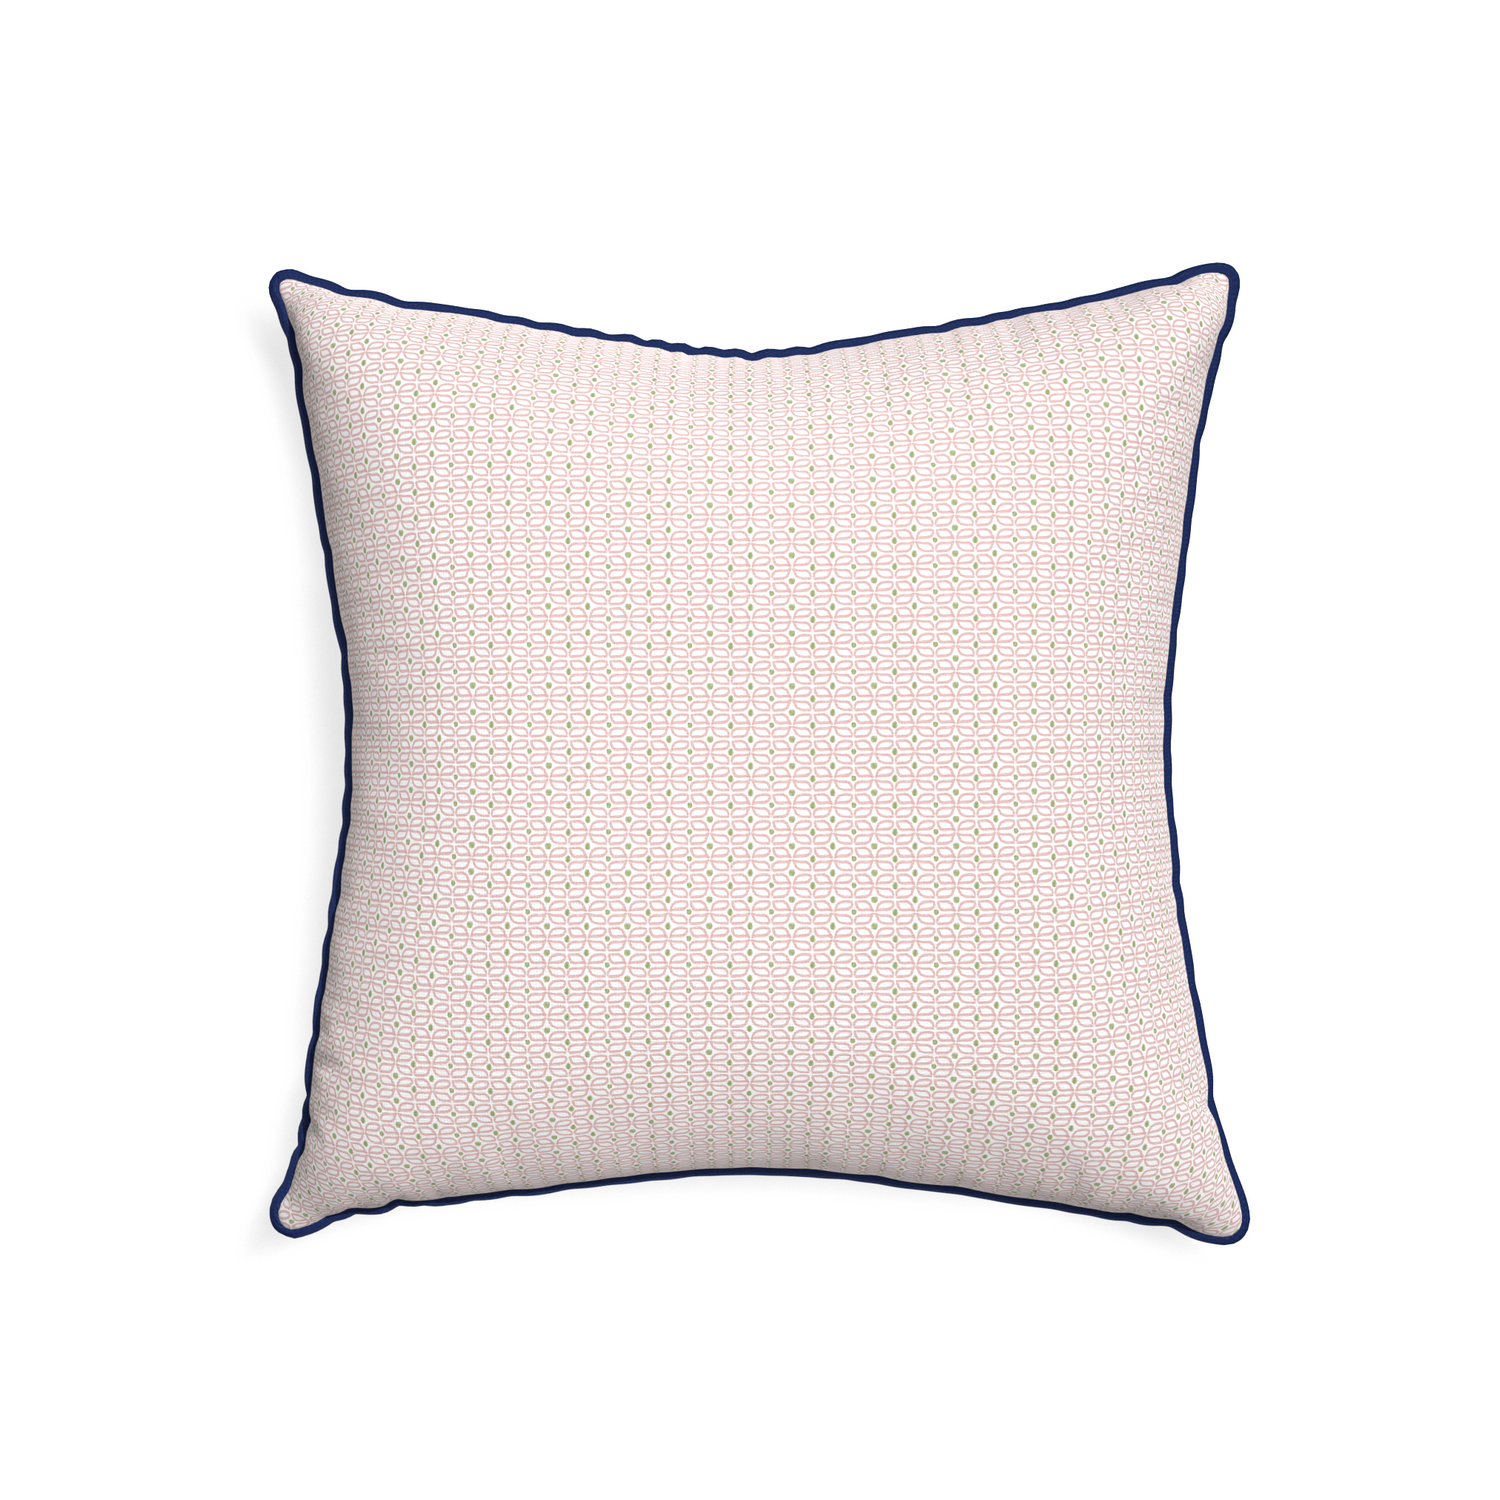 22-square loomi pink custom pink geometricpillow with midnight piping on white background